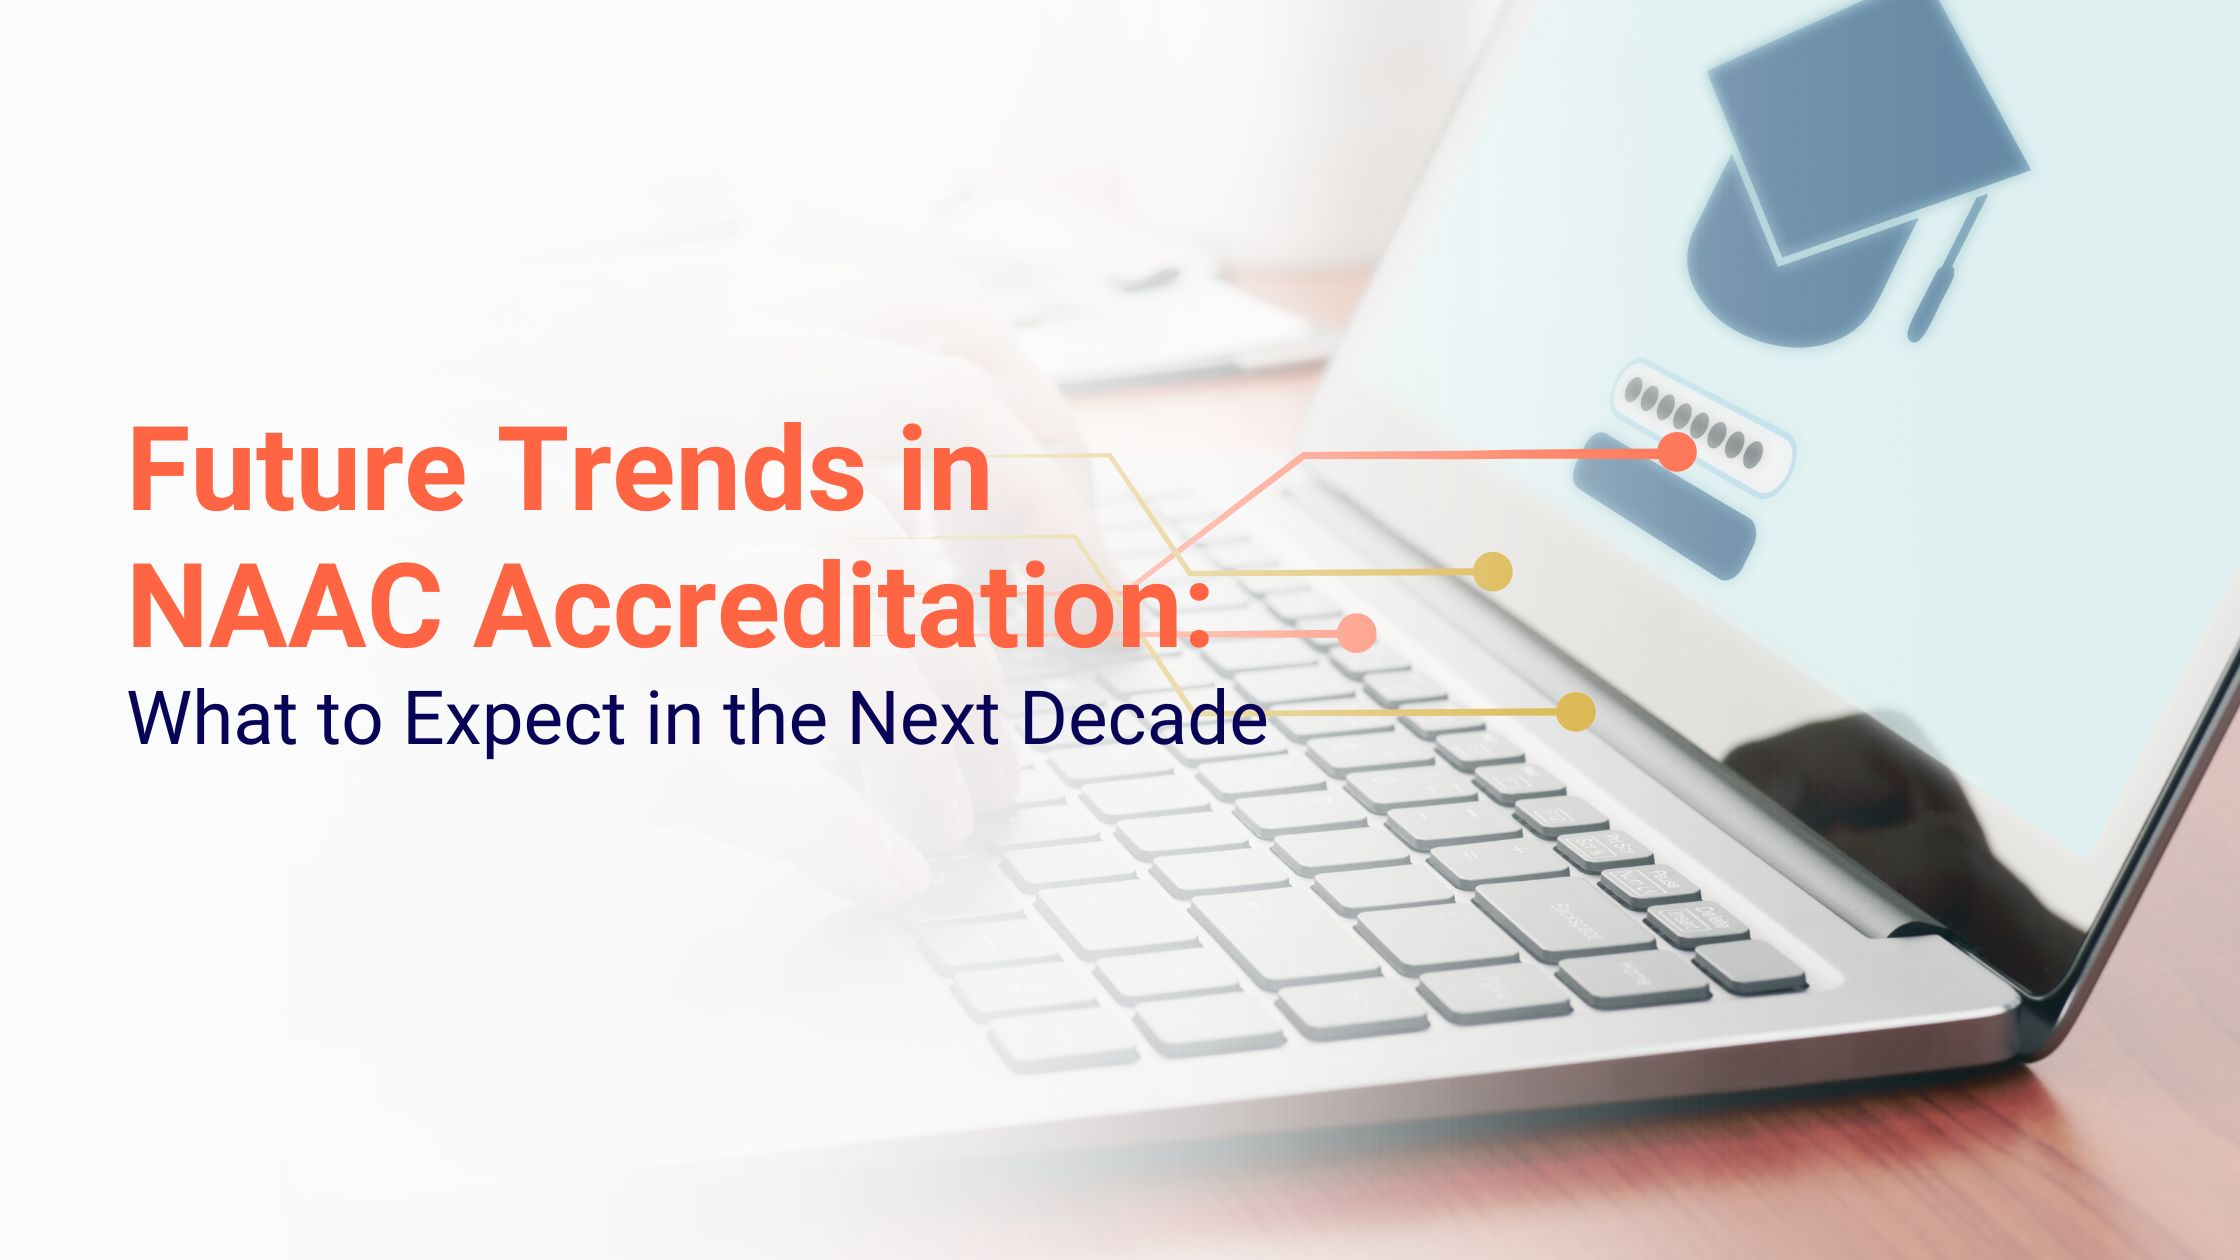 Future Trends in NAAC Accreditation: What to Expect in the Next Decade